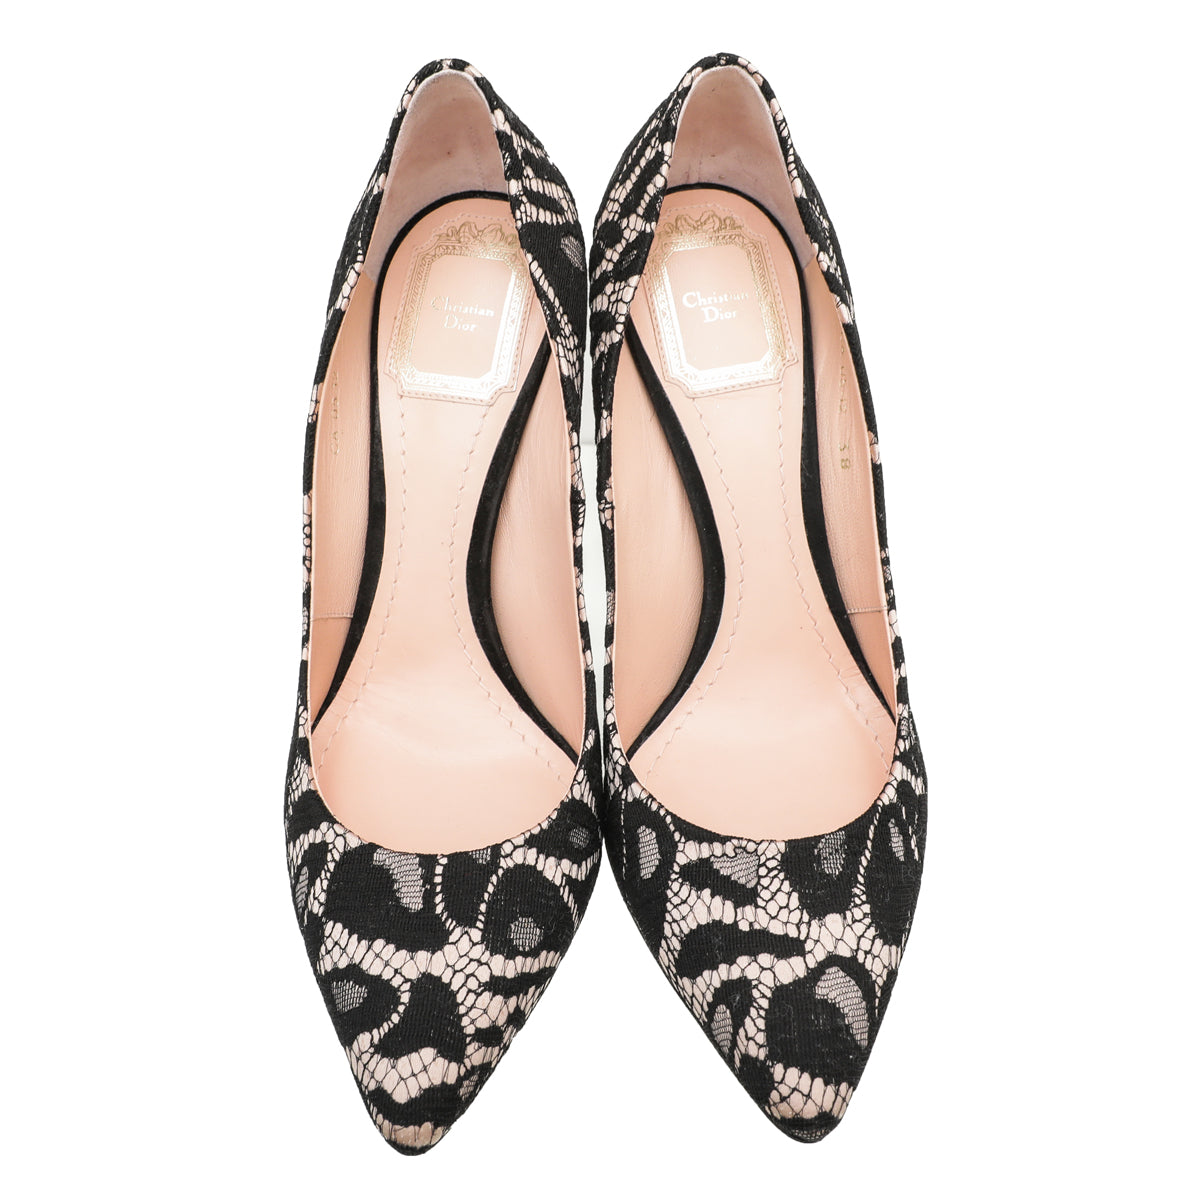 Christian Dior Bicolor Satin Lace Pointy Pumps 38